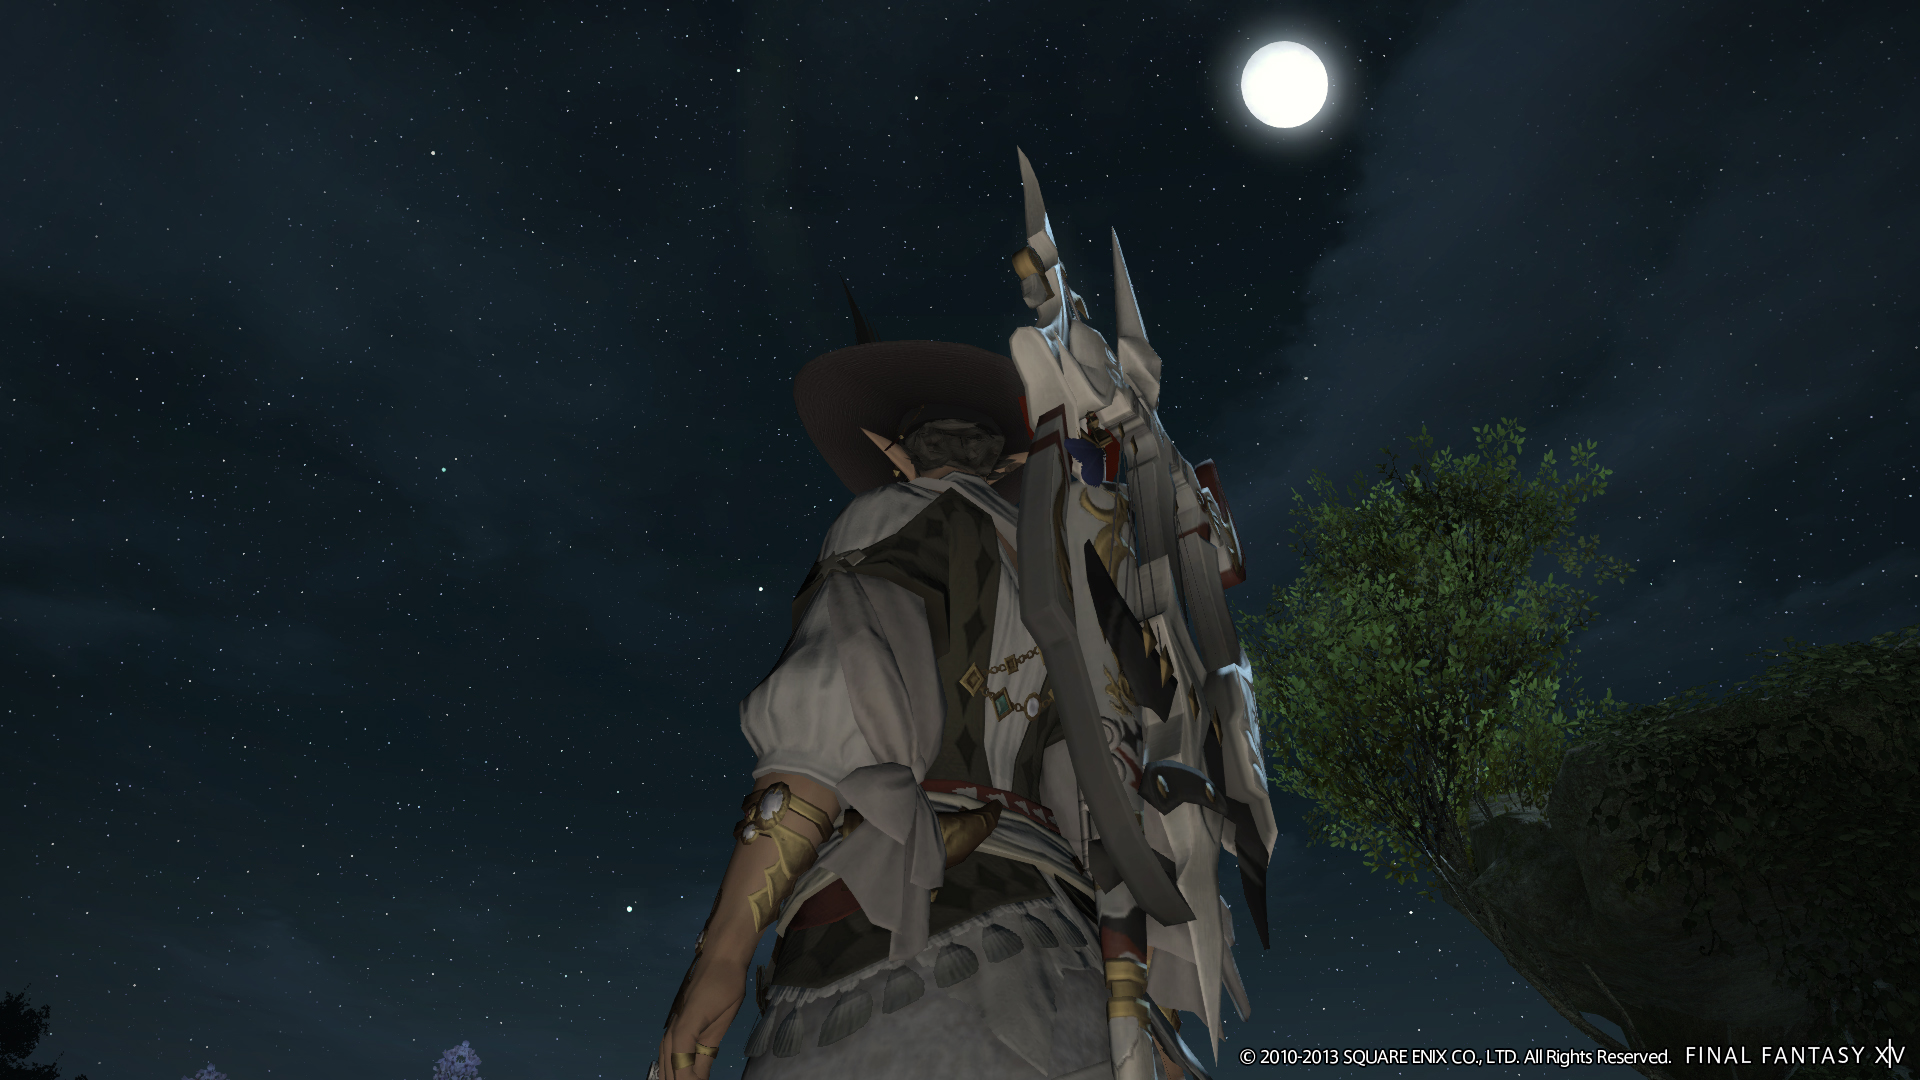 Final Fantasy Xiv Media Blowout Signals The Arrival Of The Games Official Benchmark Nova